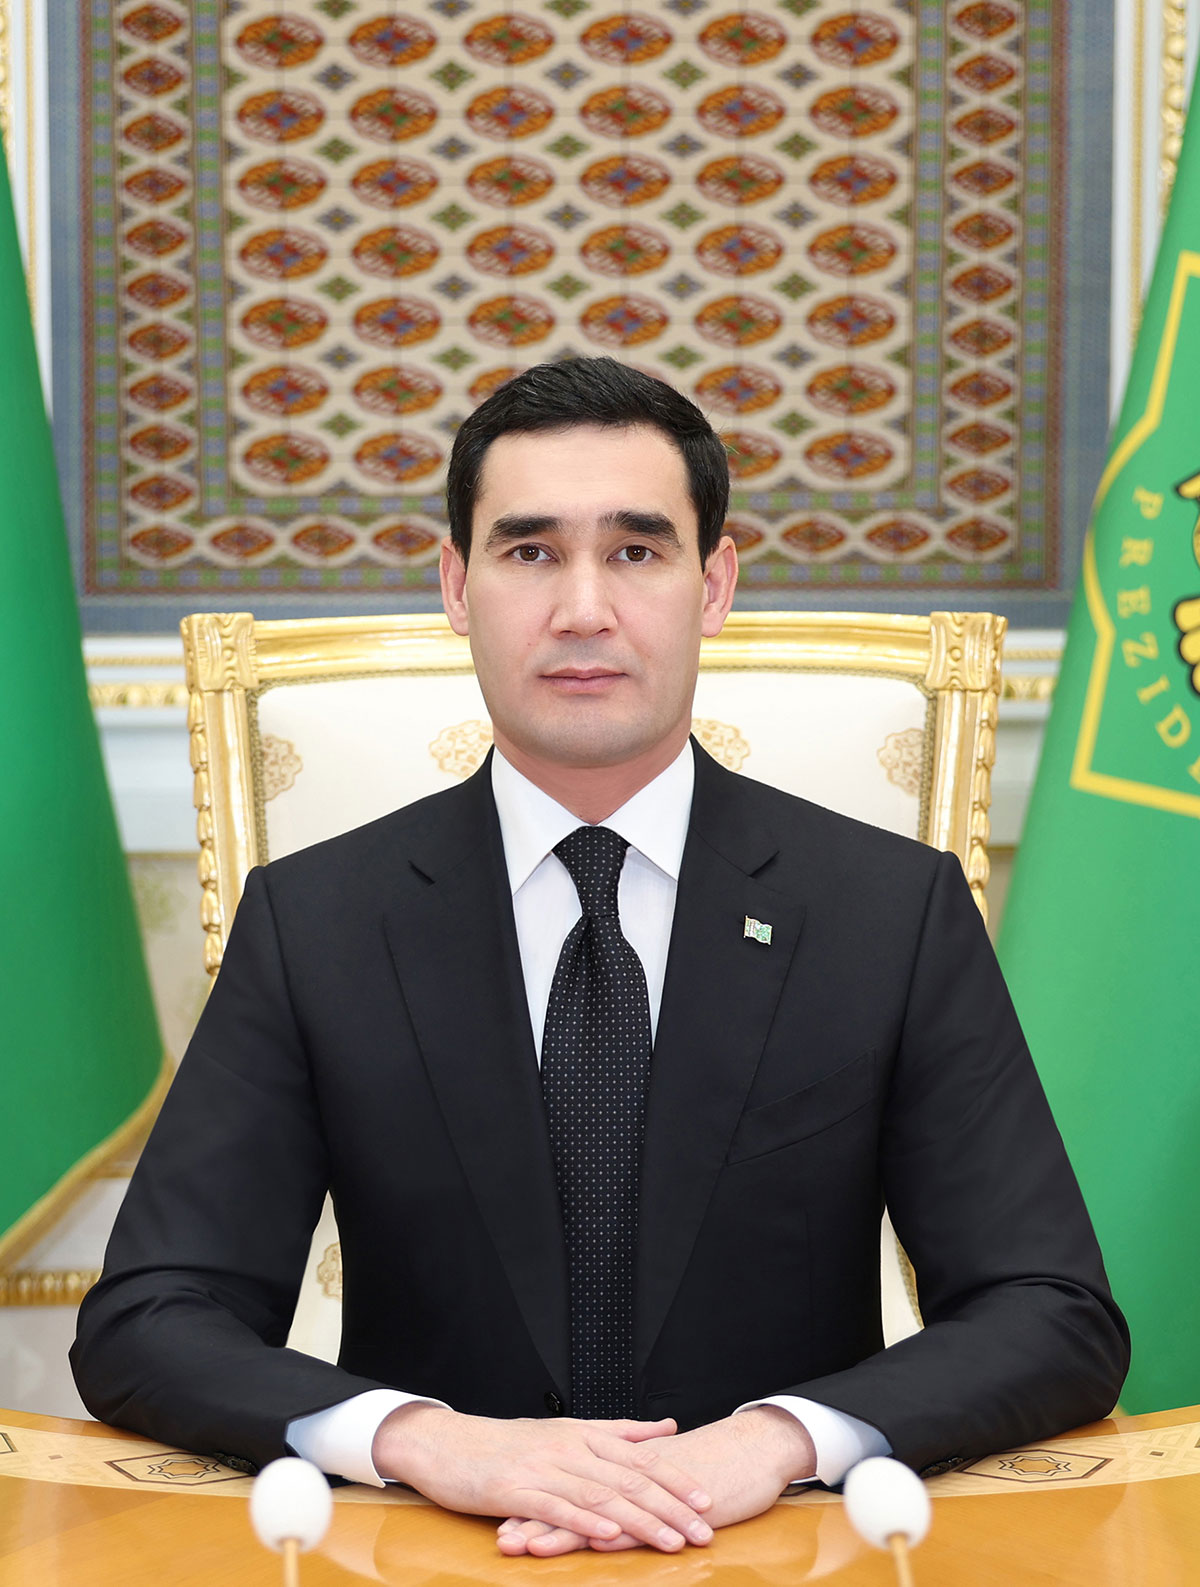 President of Turkmenistan congratulated the leadership of the People’s Republic of China